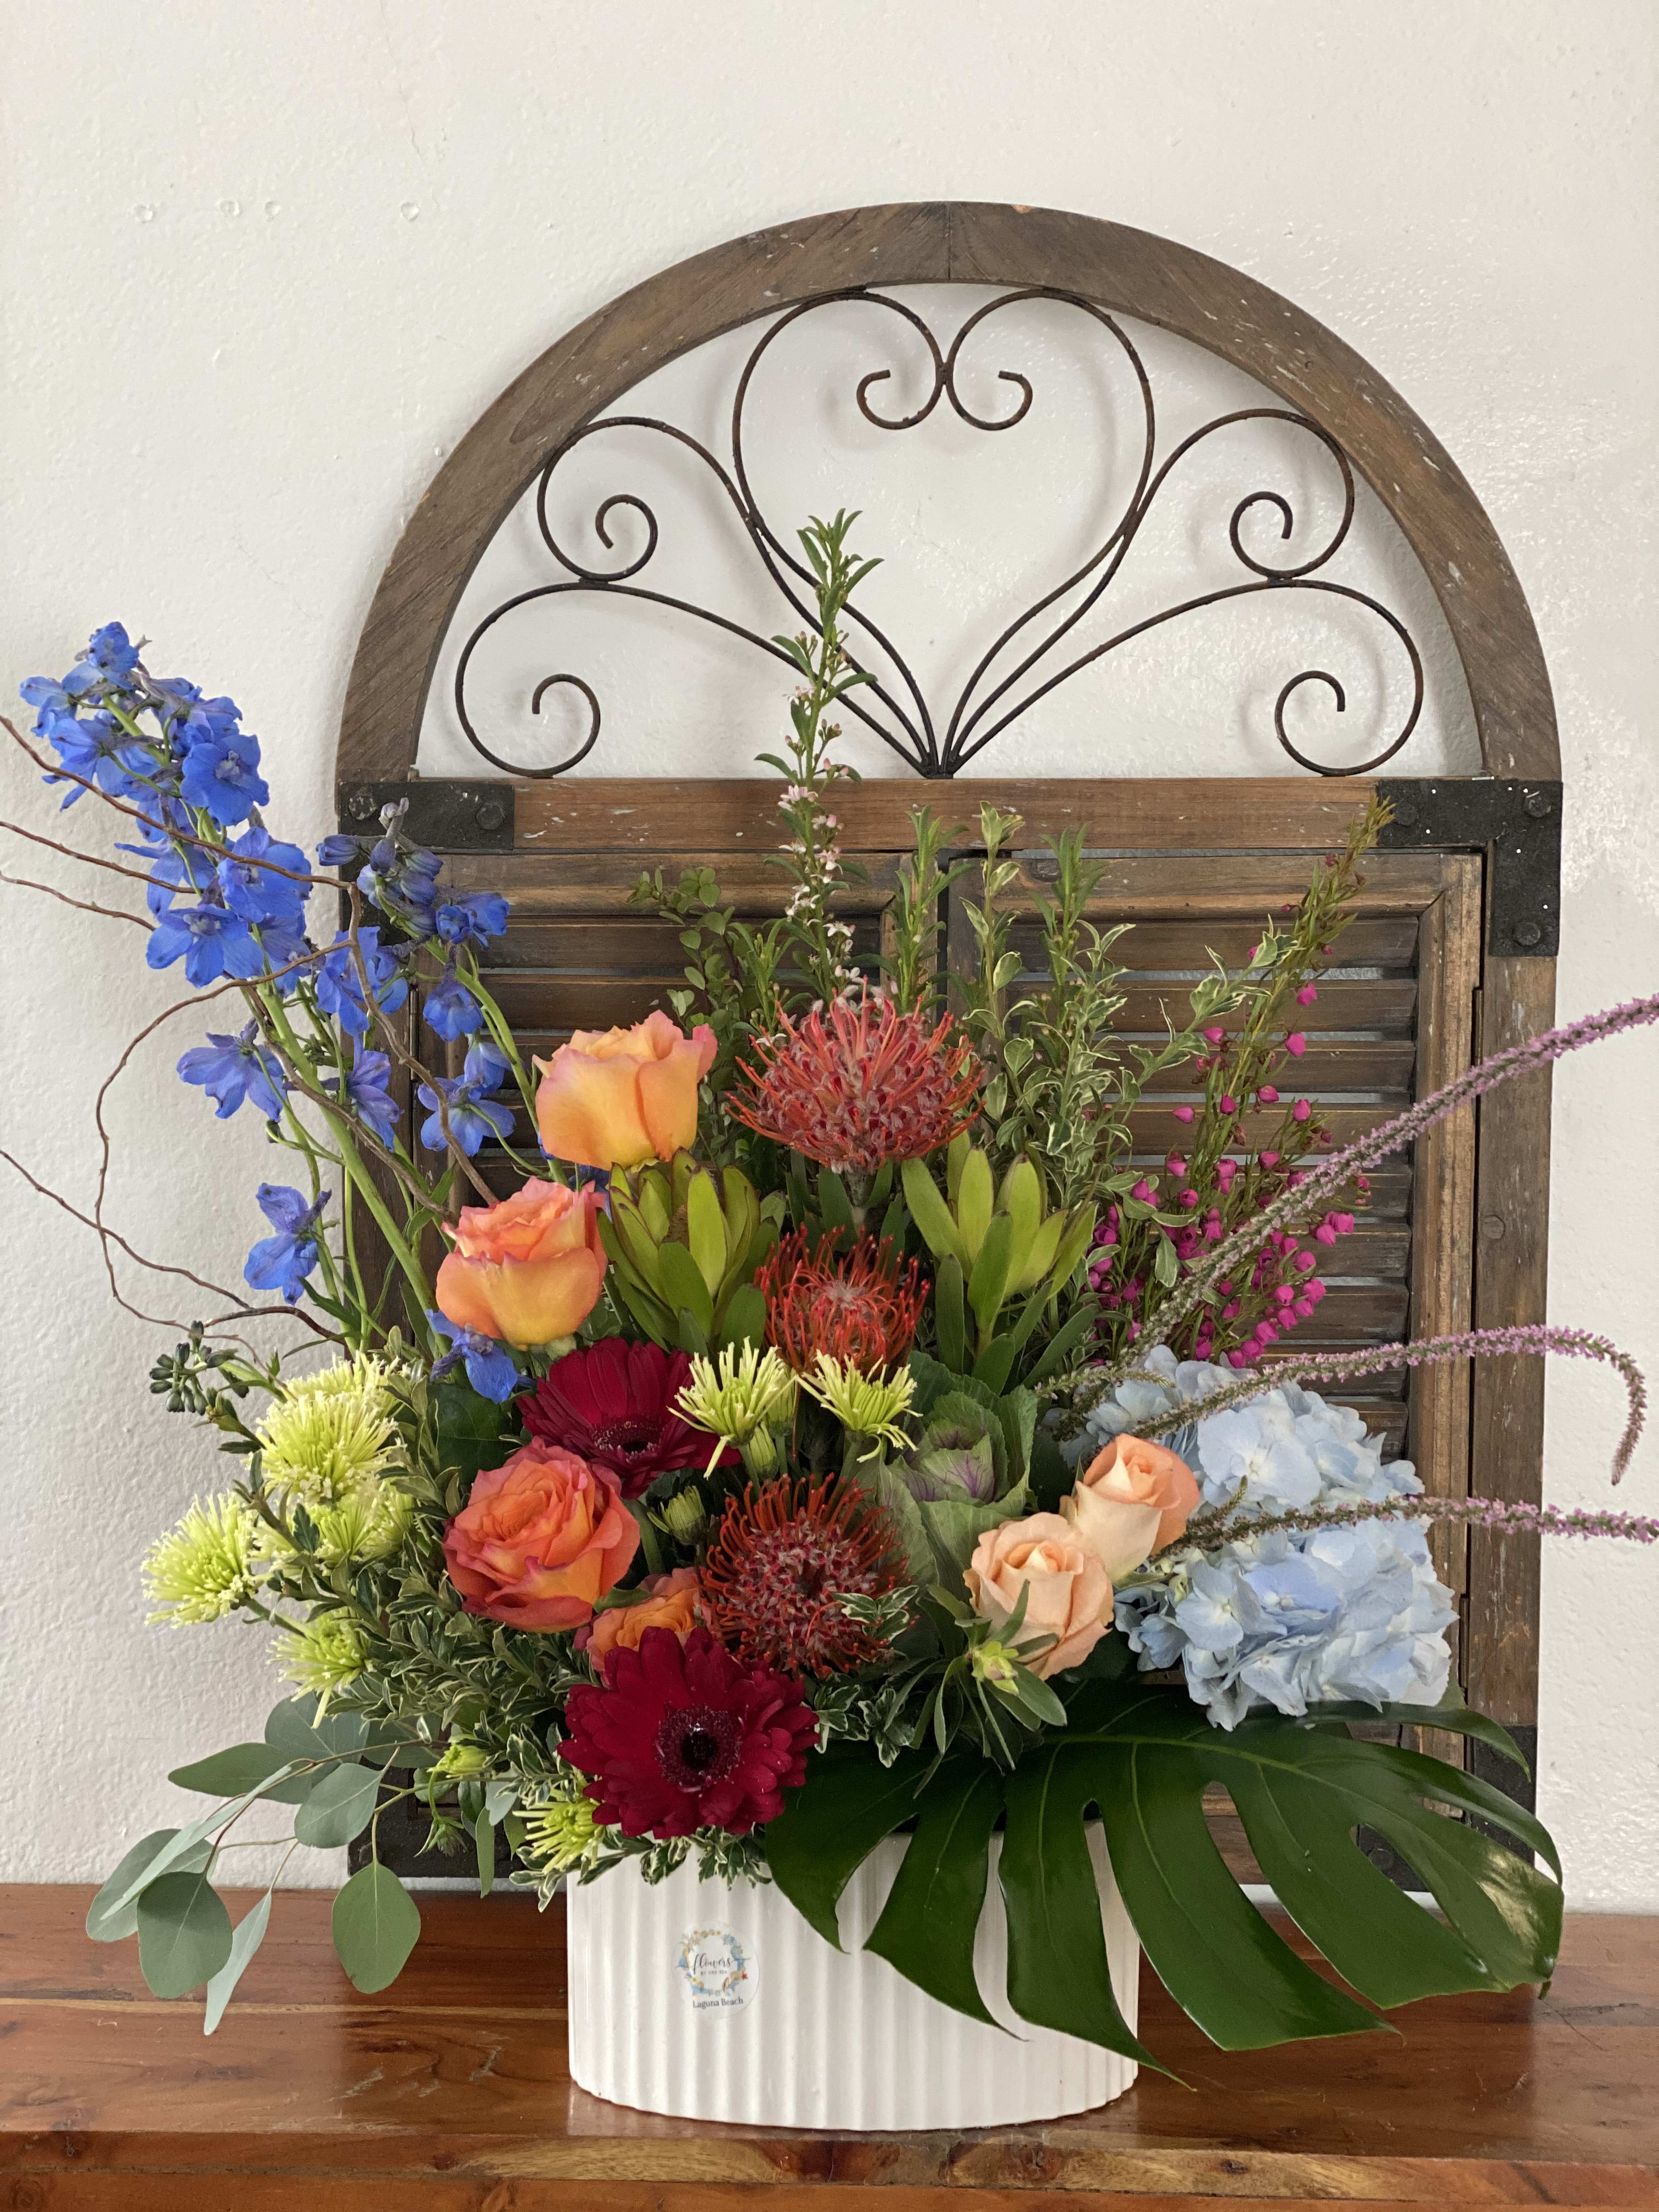 Delphinium Joy - This grand arrangement has a mixed color combination of delphiniums, protea, hydrangeas, roses, and others.